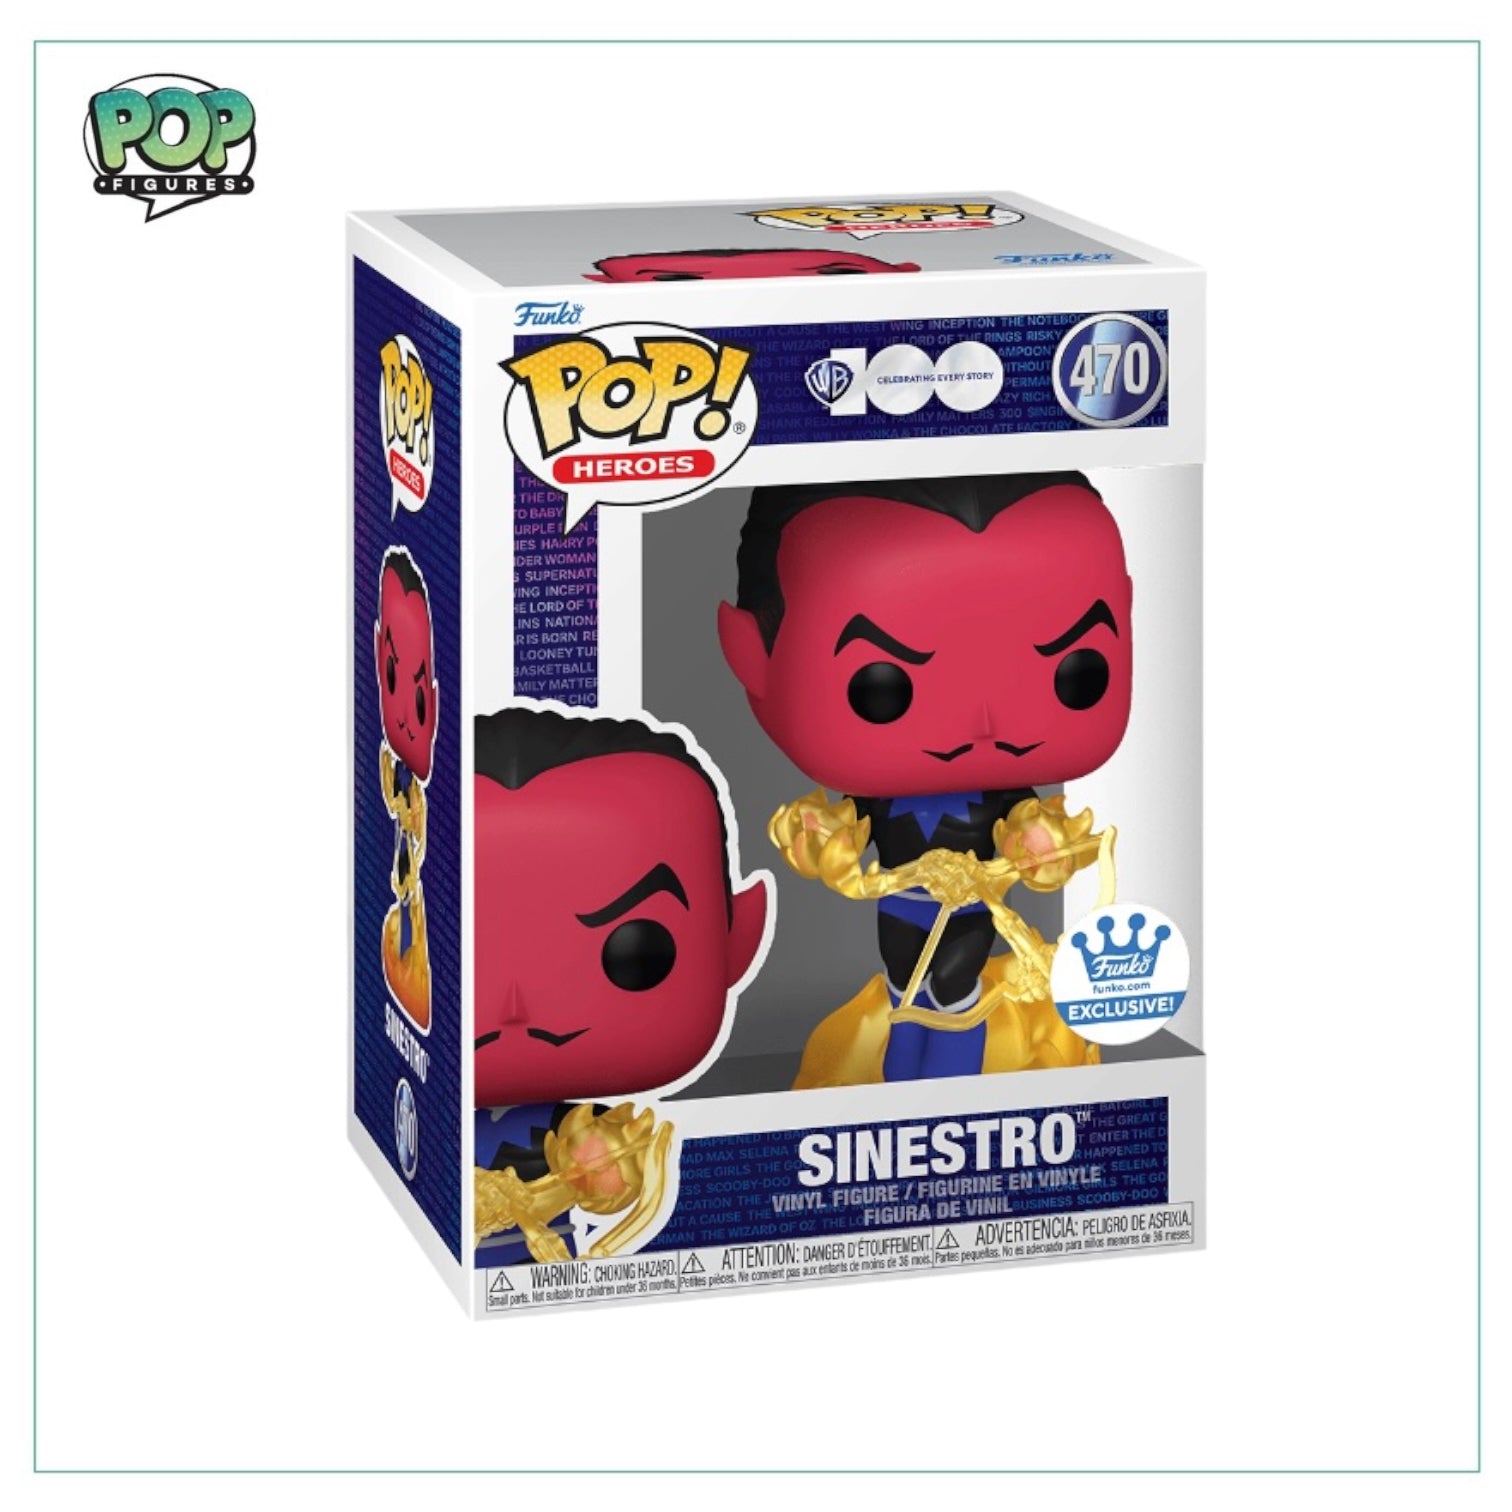 Sinestro #470 Funko Pop! - Warner Bros 100 Celebrating Every Story - Funko Exclusive - Angry Cat